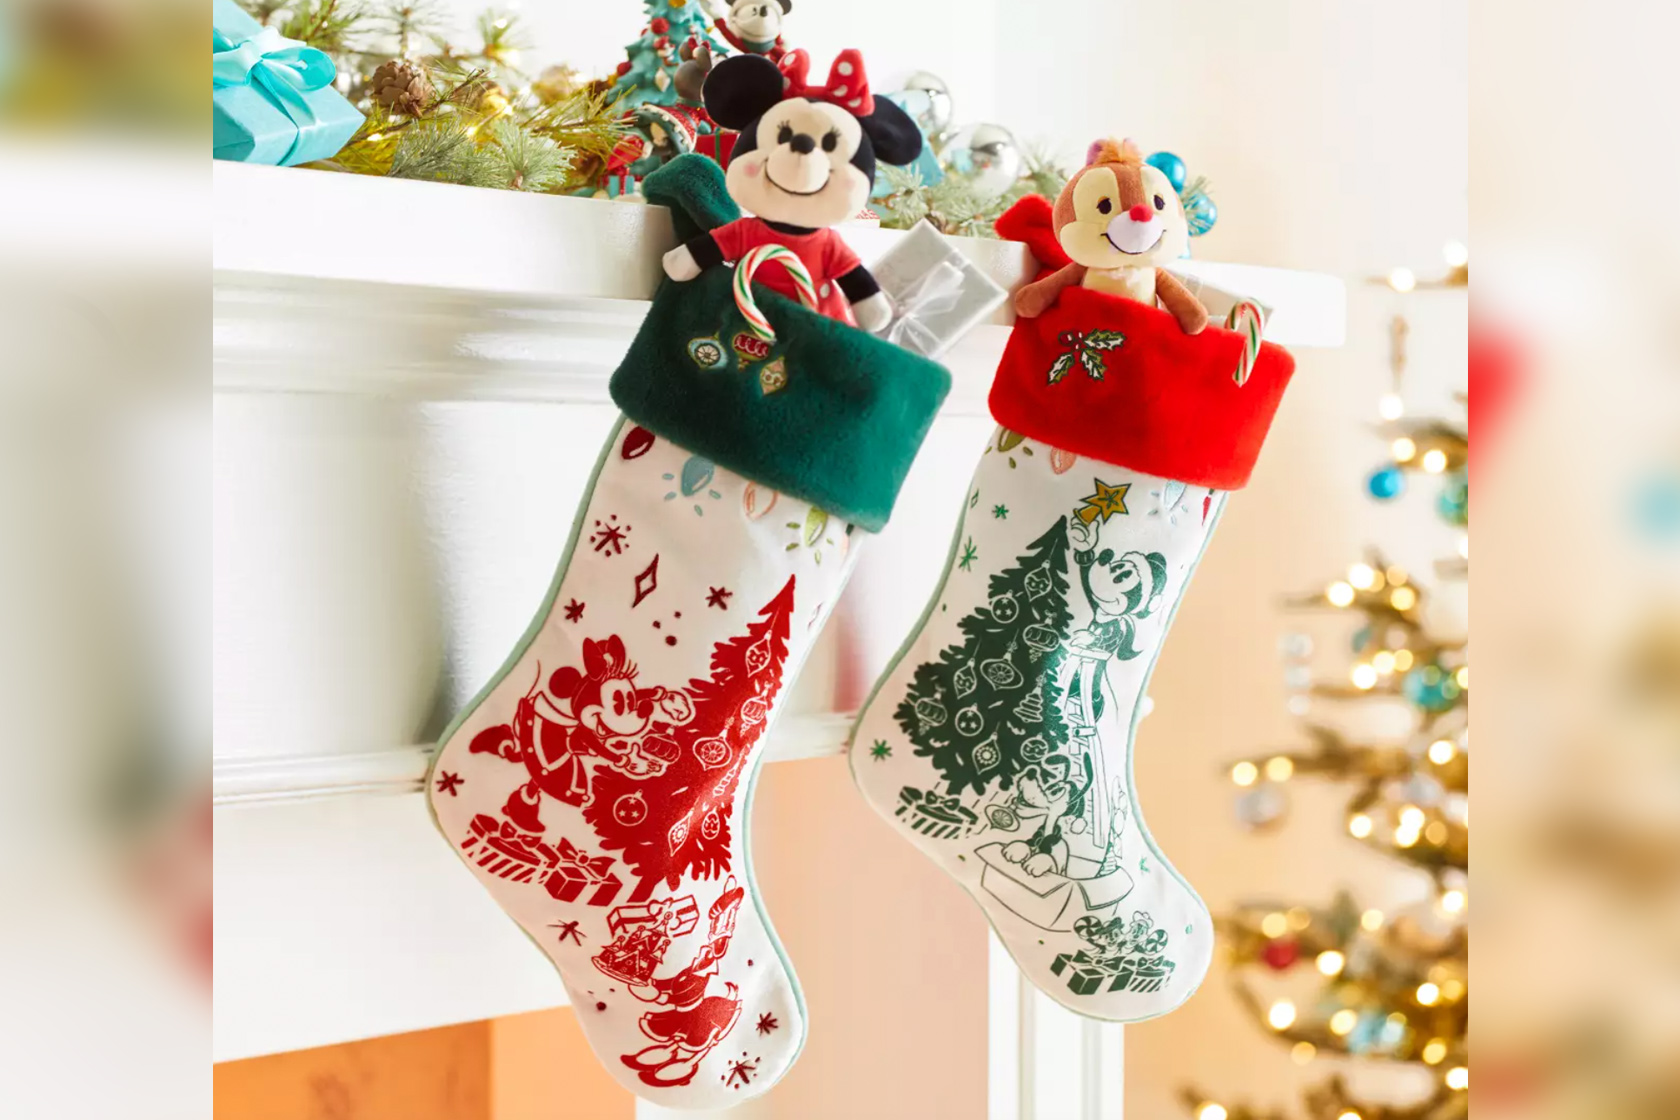 Disney Stocking Stuffer Gifts for Adults - This Fairy Tale Life